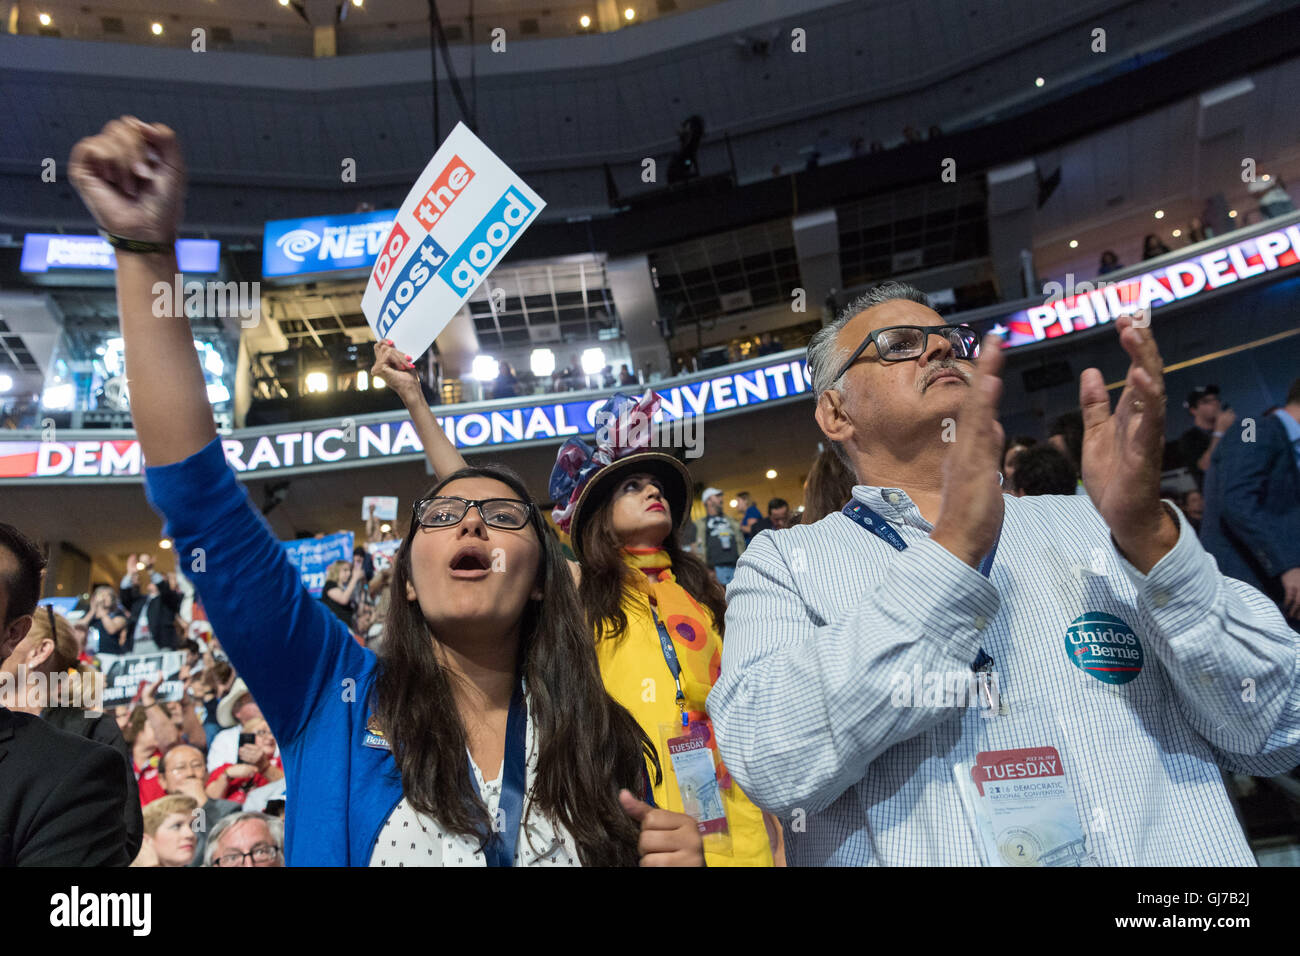 Delegates cheers for Bernie Sanders during the roll call vote during the 2nd day of the Democratic National Convention at the Wells Fargo Center July 26, 2016 in Philadelphia, Pennsylvania. Stock Photo